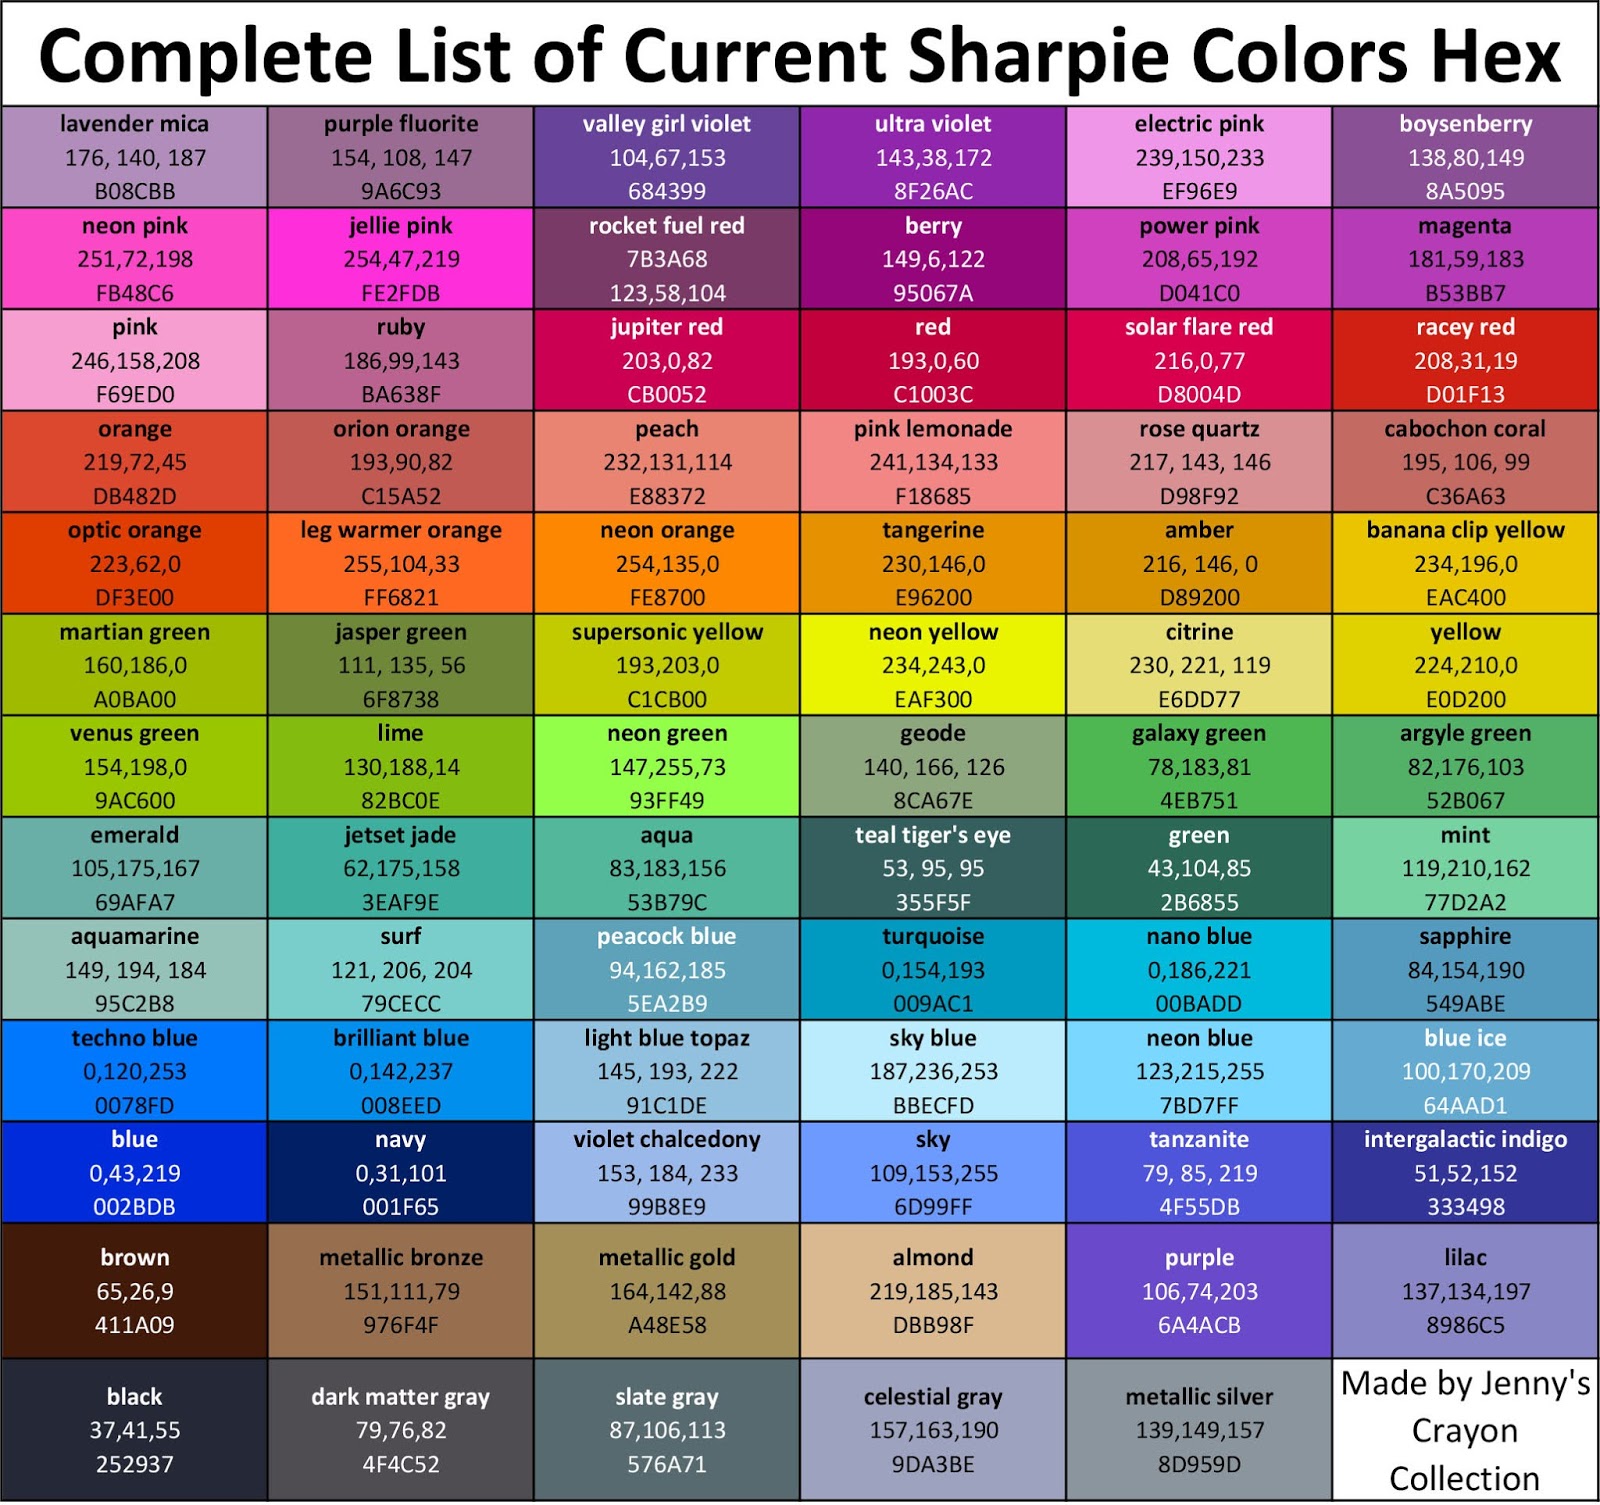 Complete List of Sharpie Marker Colors, Fine and Ultra Fine Jenny's